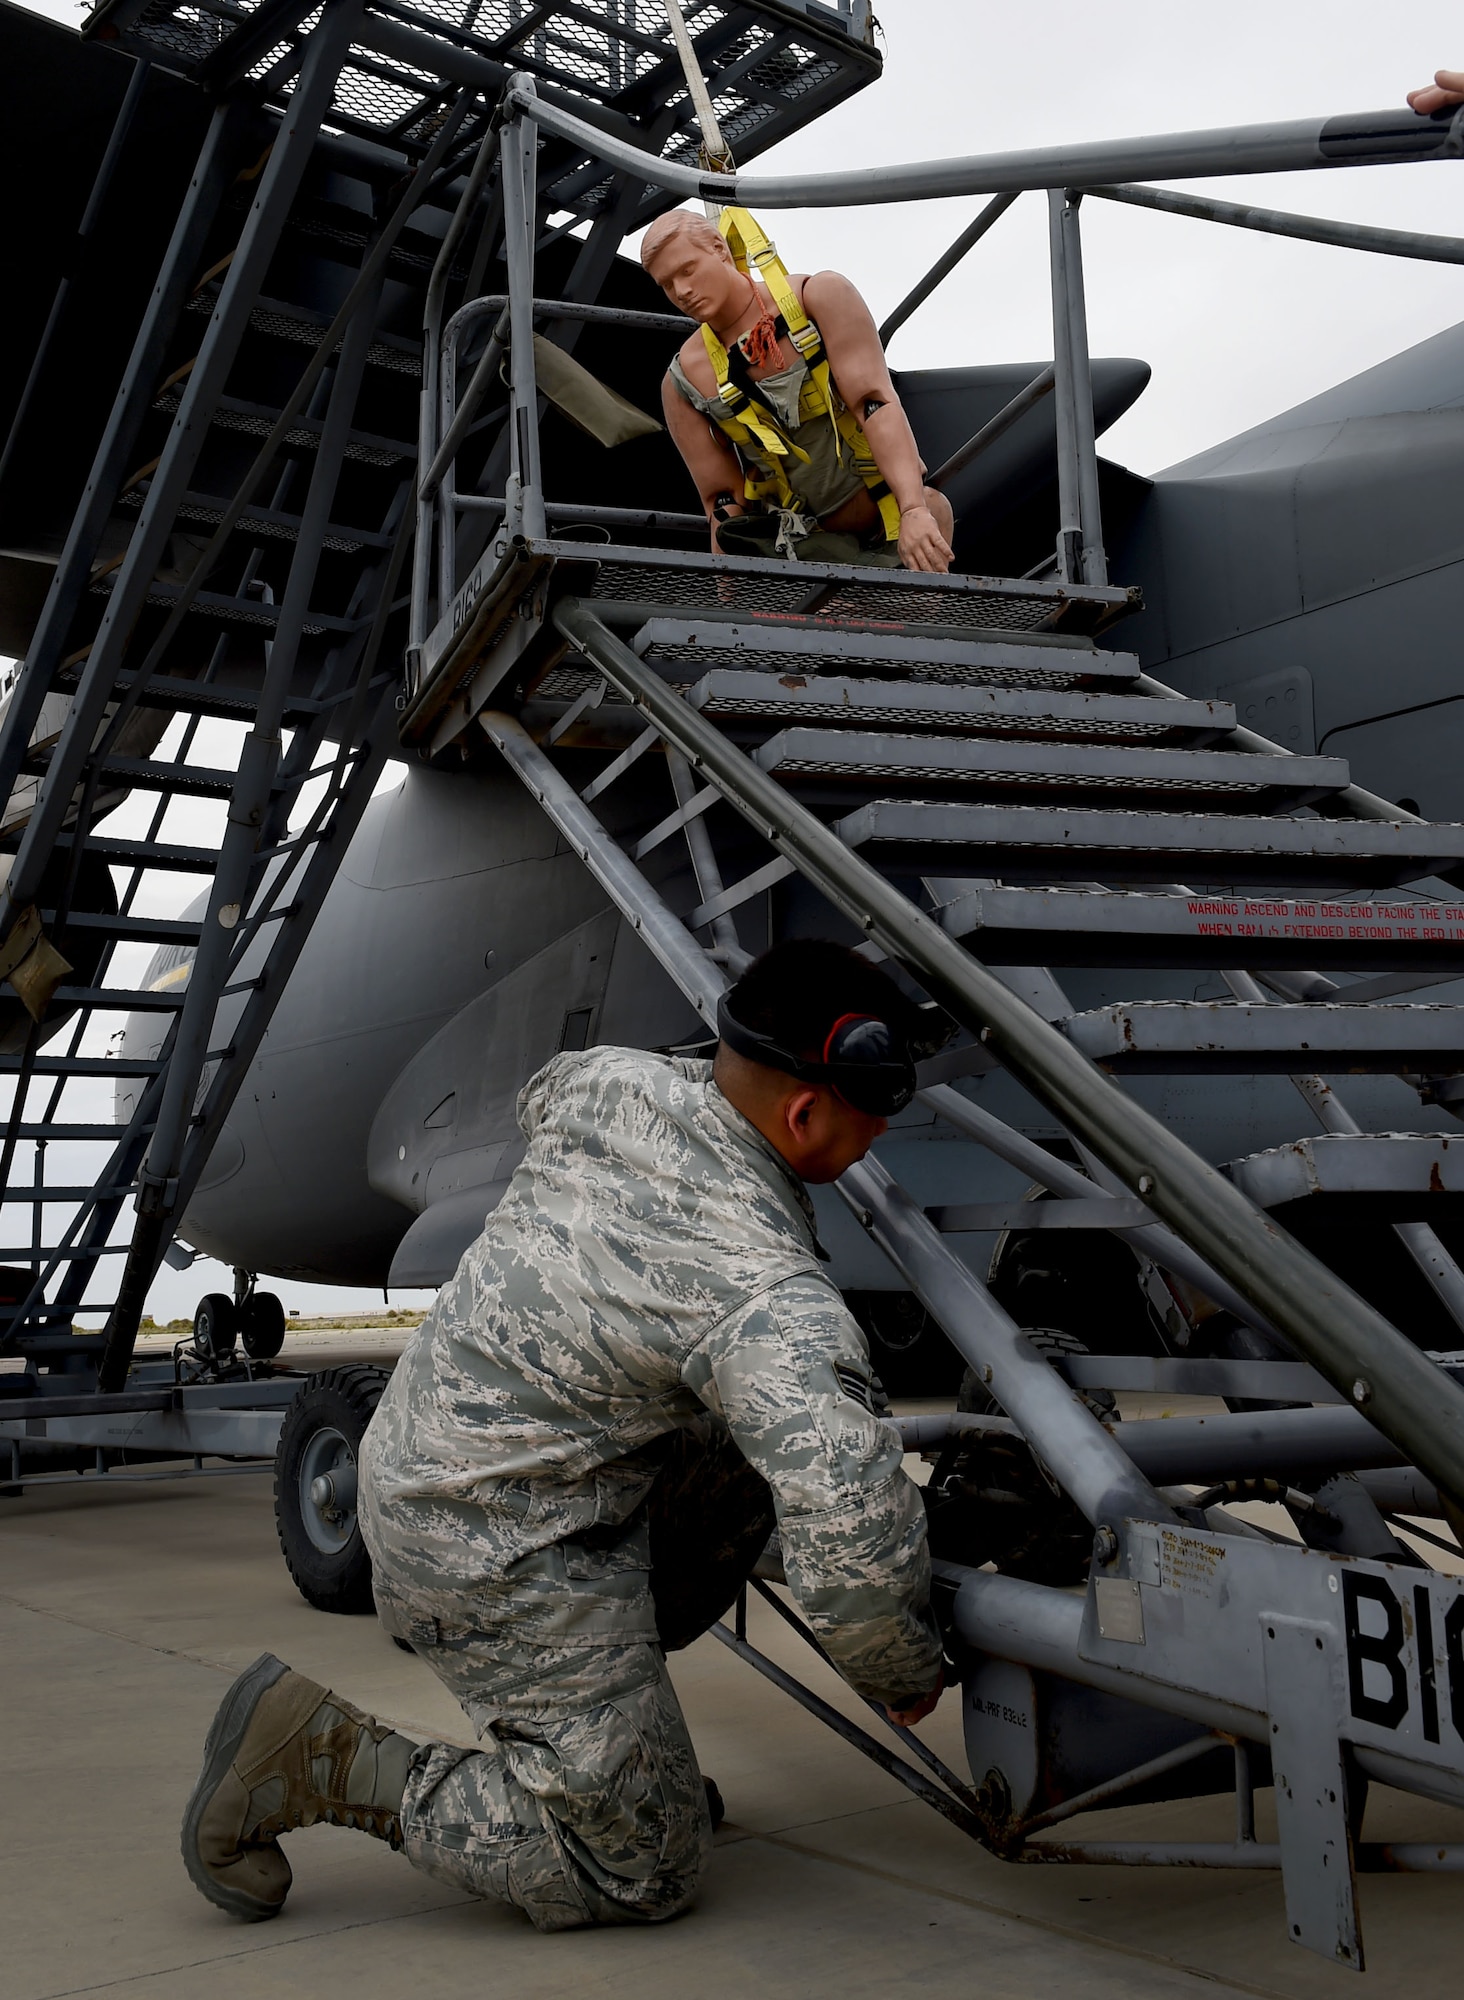 Senior Airman Jerome Llanes, 5th Expeditionary Aircraft Maintenance Squadron C-17 communications navigation systems technician, raises a B-1 stand to support a mock casualty during a fall protection exercise on the flightline at an undisclosed location in Southwest Asia, March 14, 2016. A fall protection plan is required at any work site where there is a potential for a member to fall from a high elevation. (U.S. Air Force photo by Staff Sgt. Jerilyn Quintanilla)